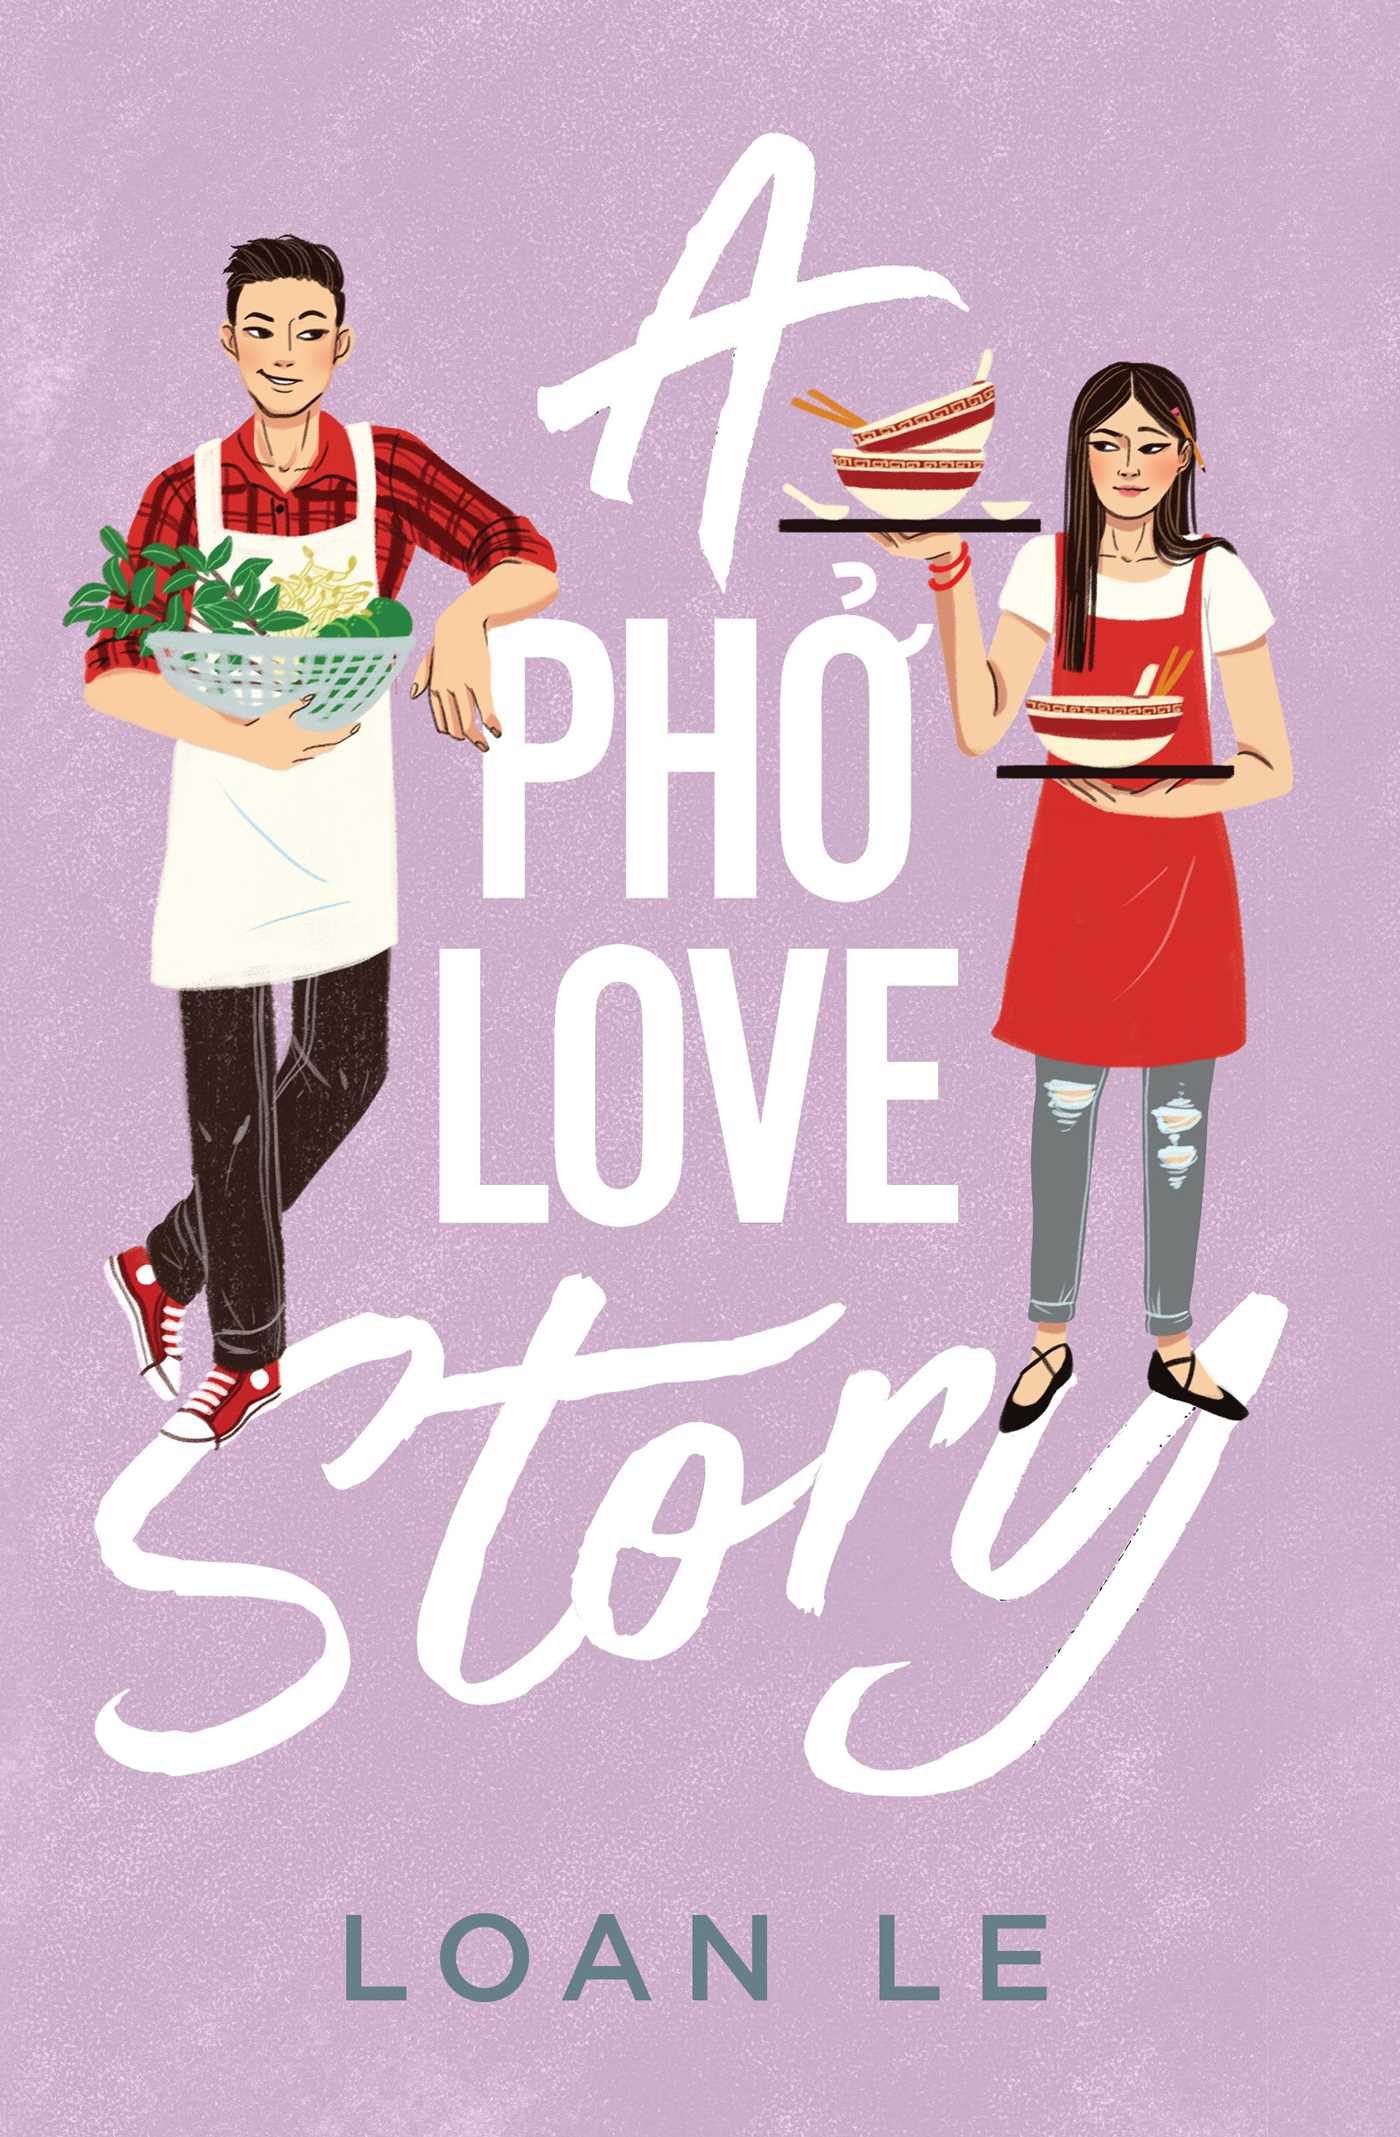 When Will A Pho Love Story By Loan Le Release Date? 2021 Contemporary Romance Releases